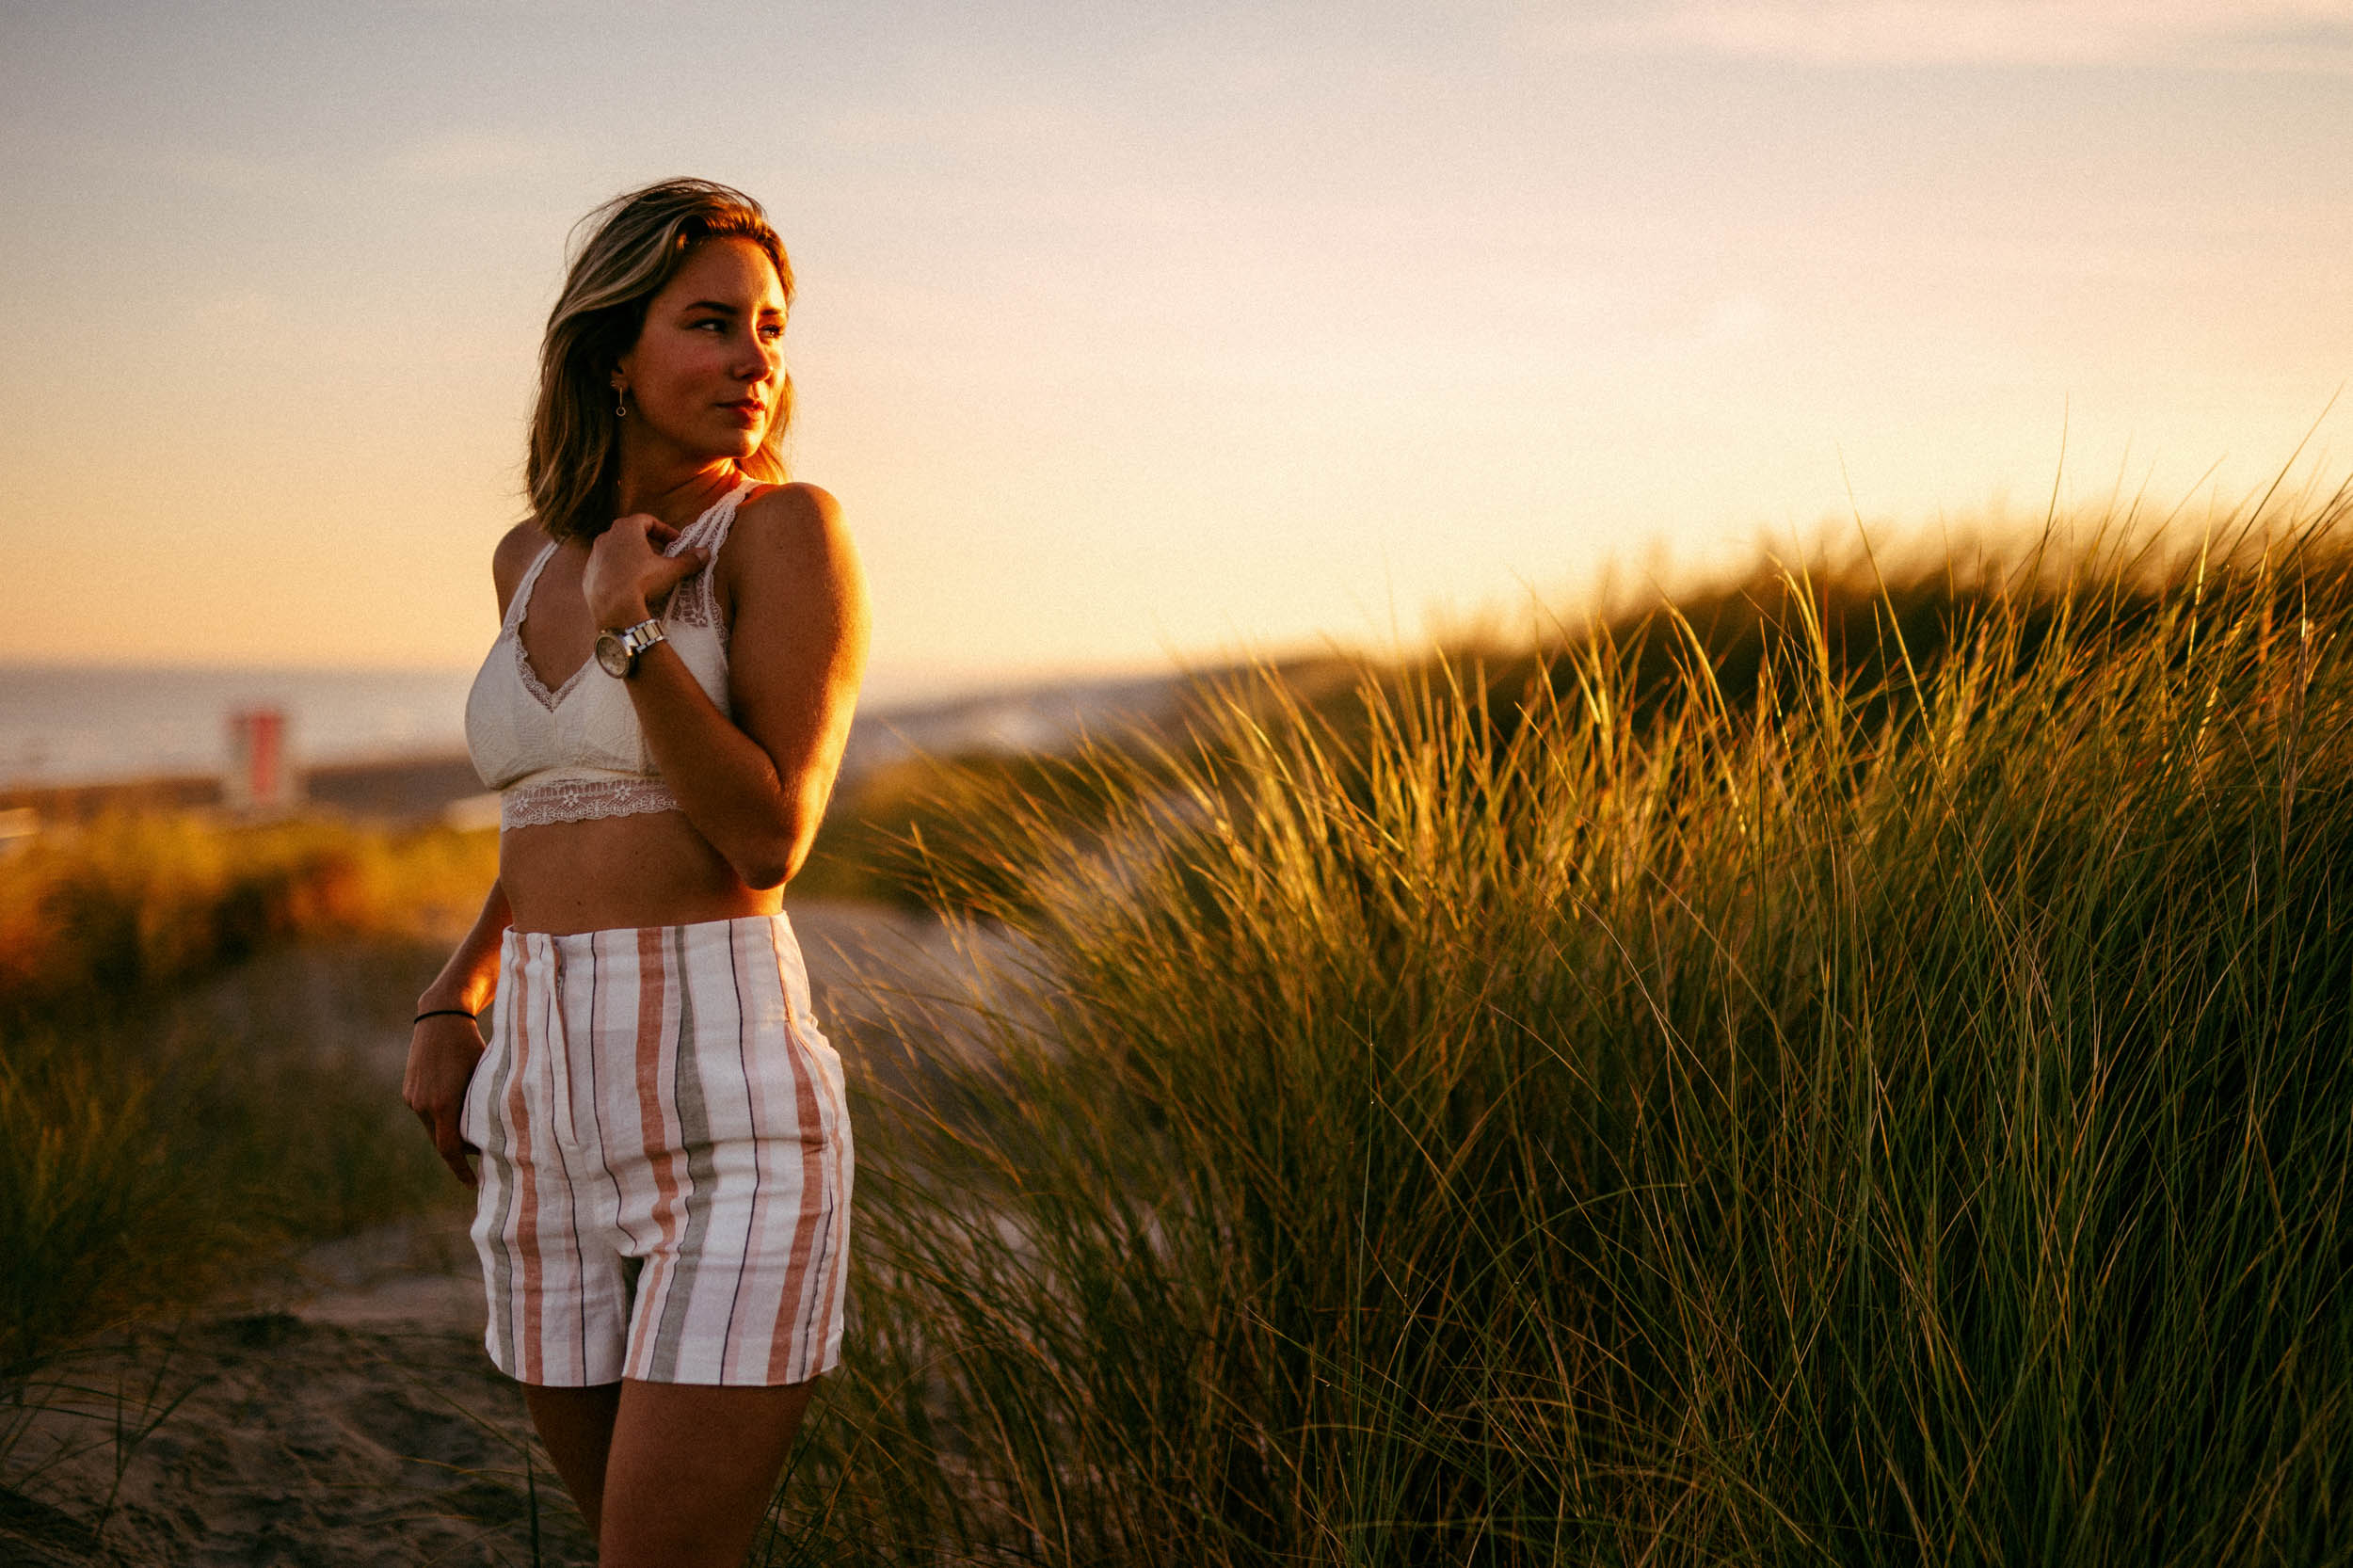 A woman in striped shorts standing on a beach at sunset, taking beach photos.